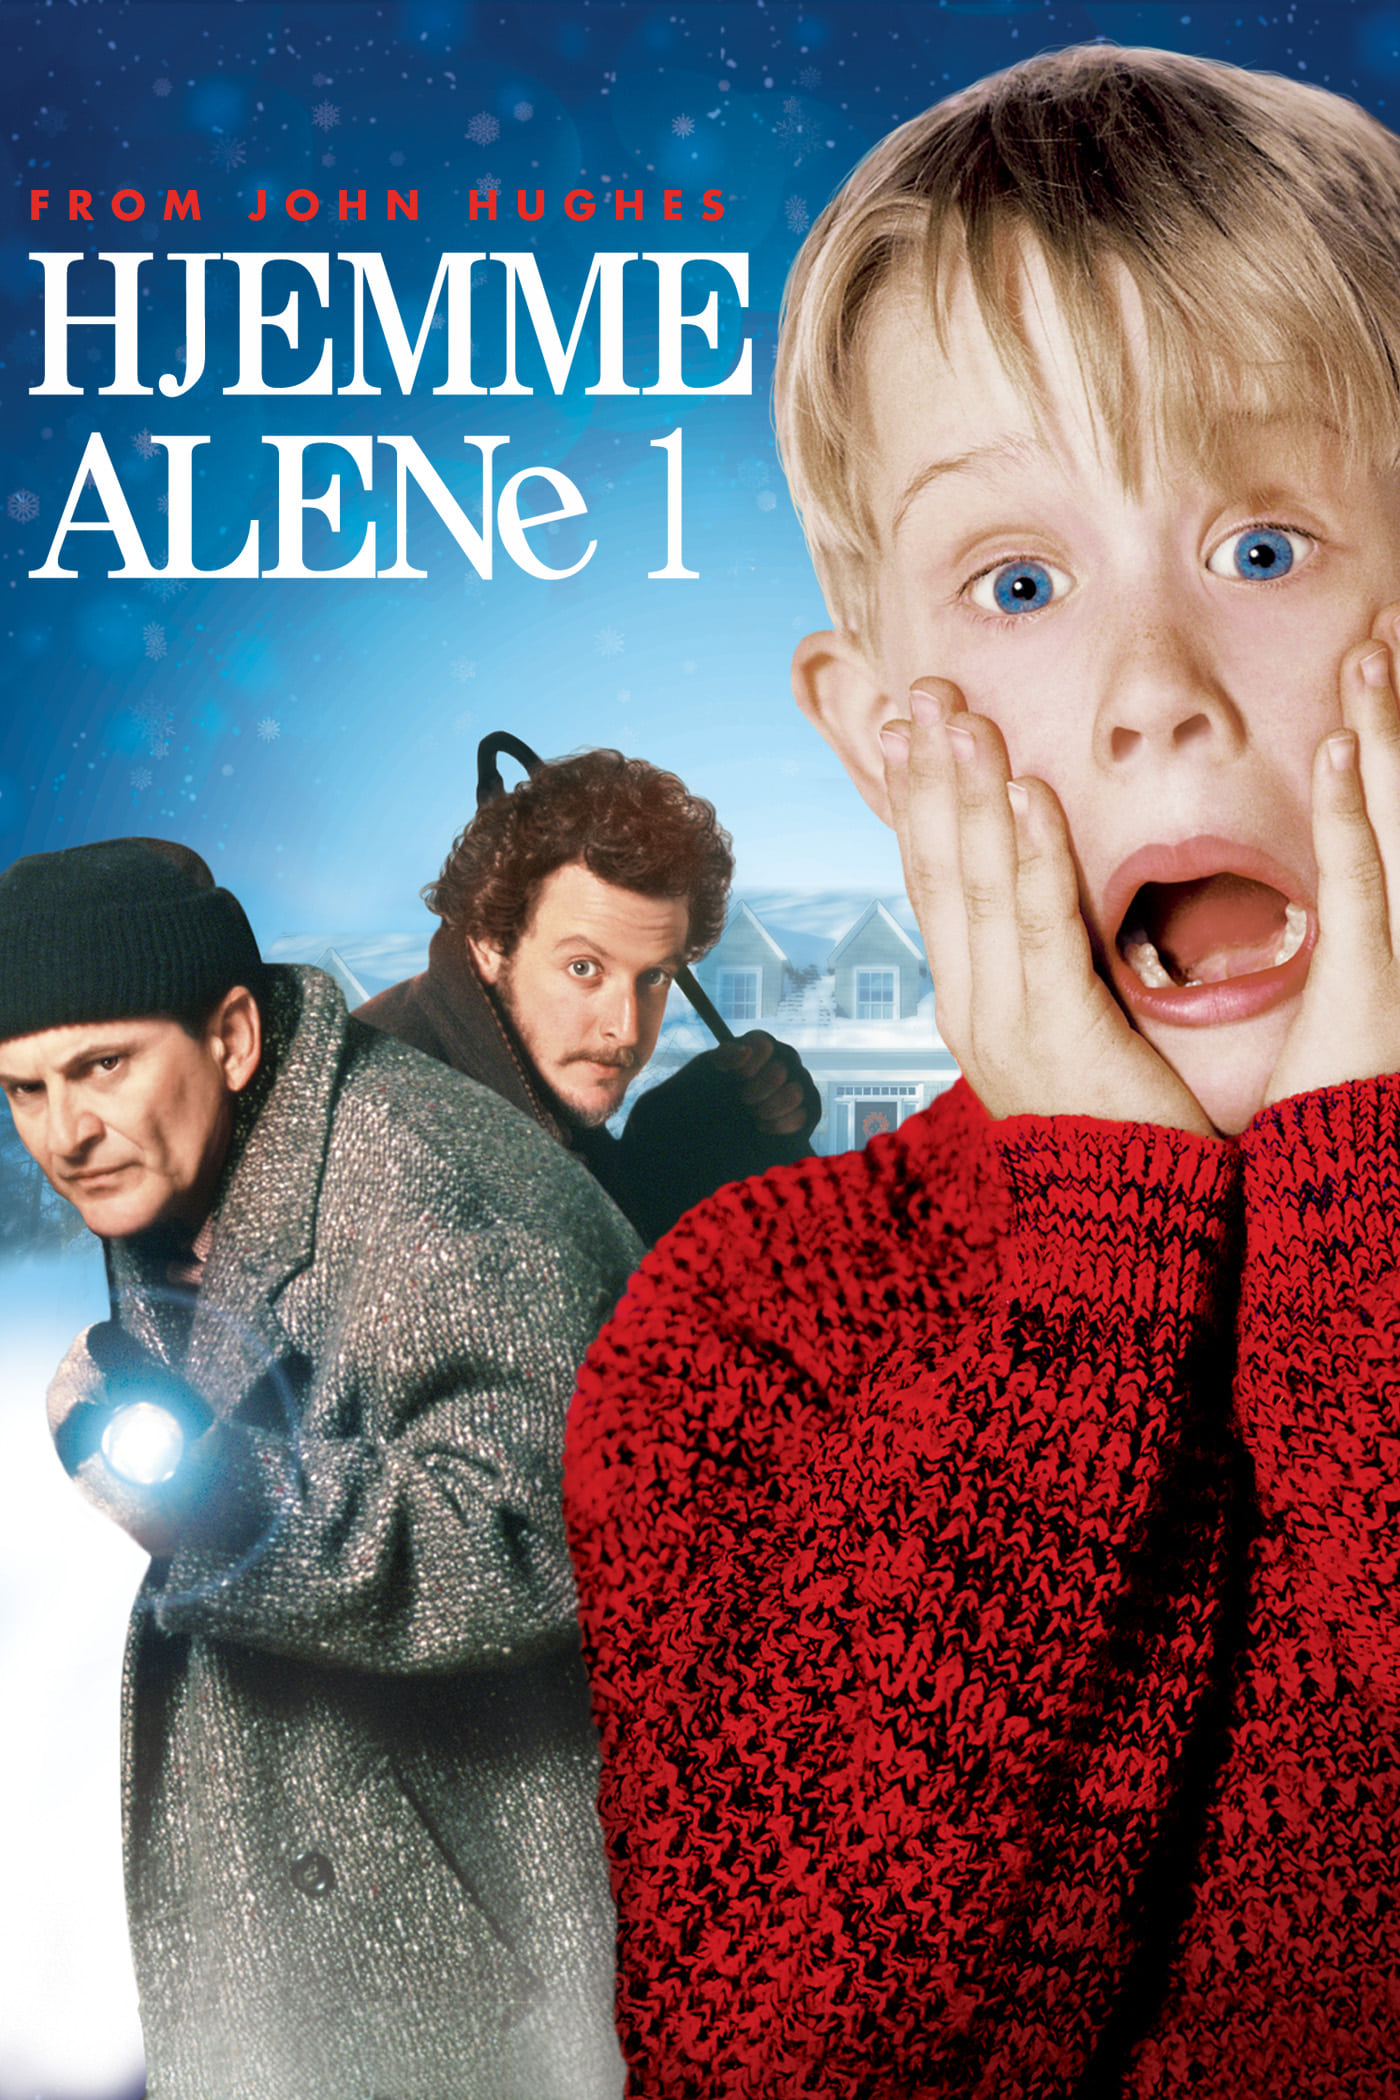 film review example home alone